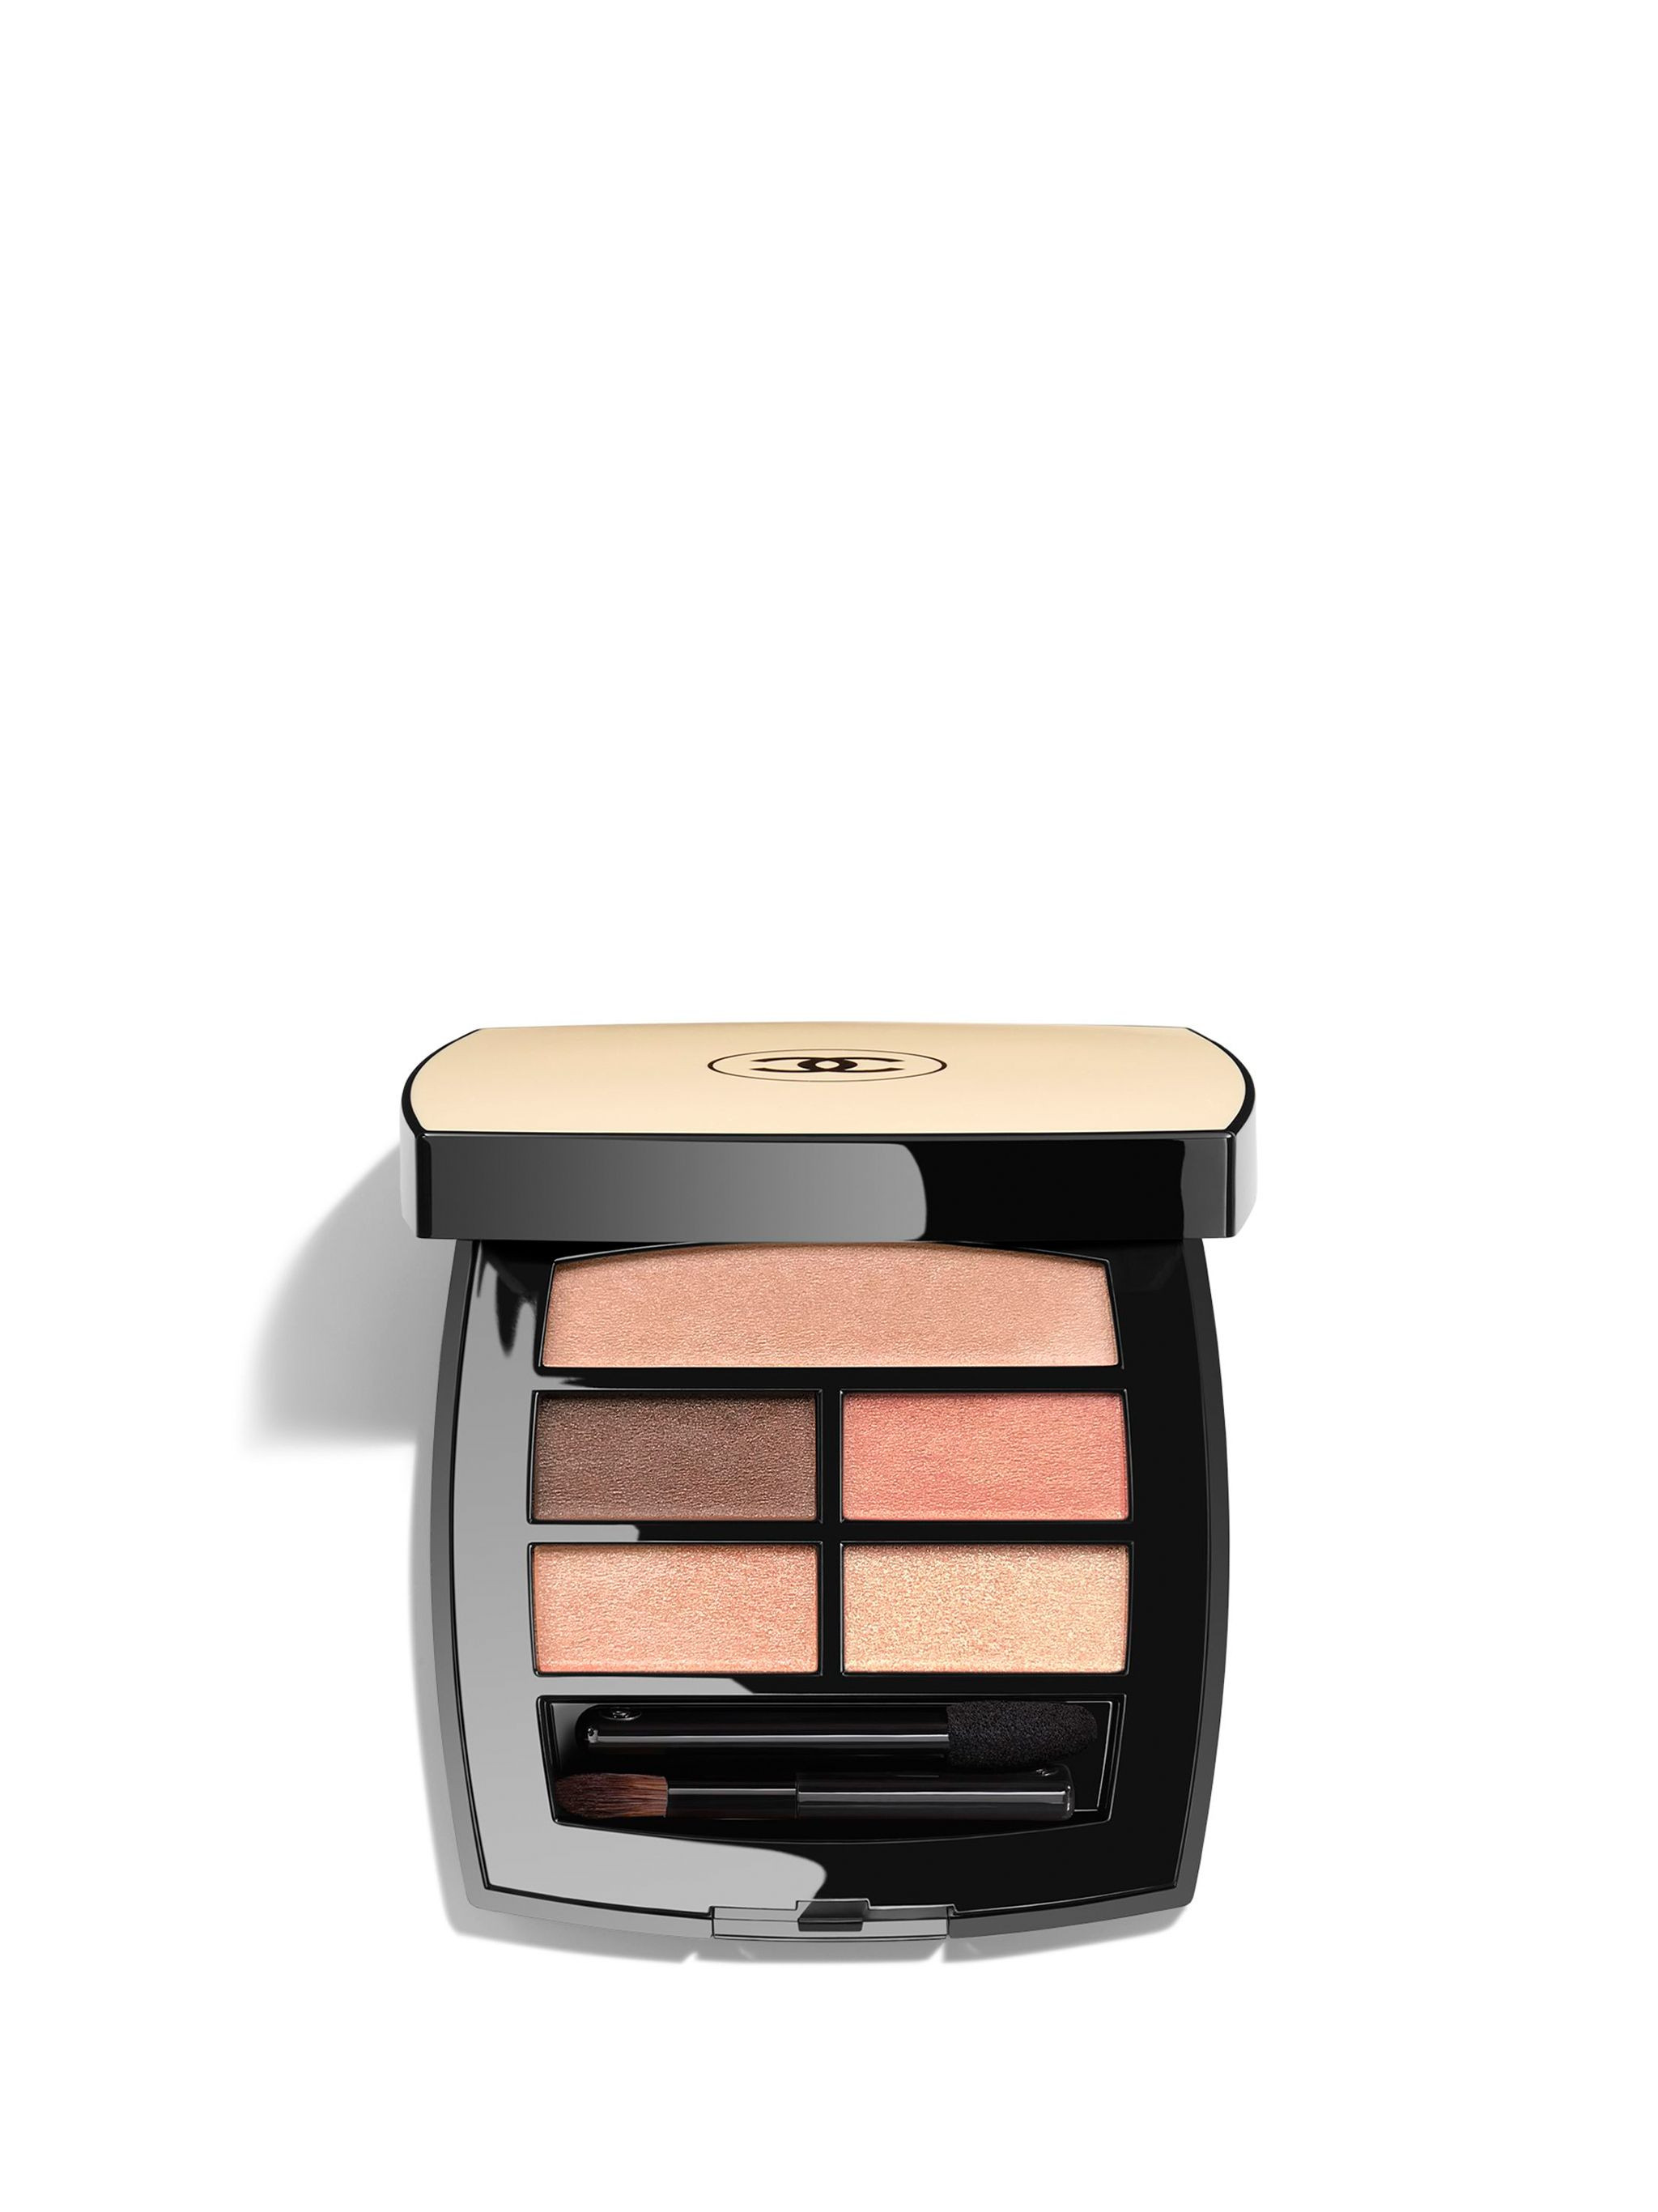 Chanel Les Beiges Healthy Glow Natural Eyeshadow Palette 